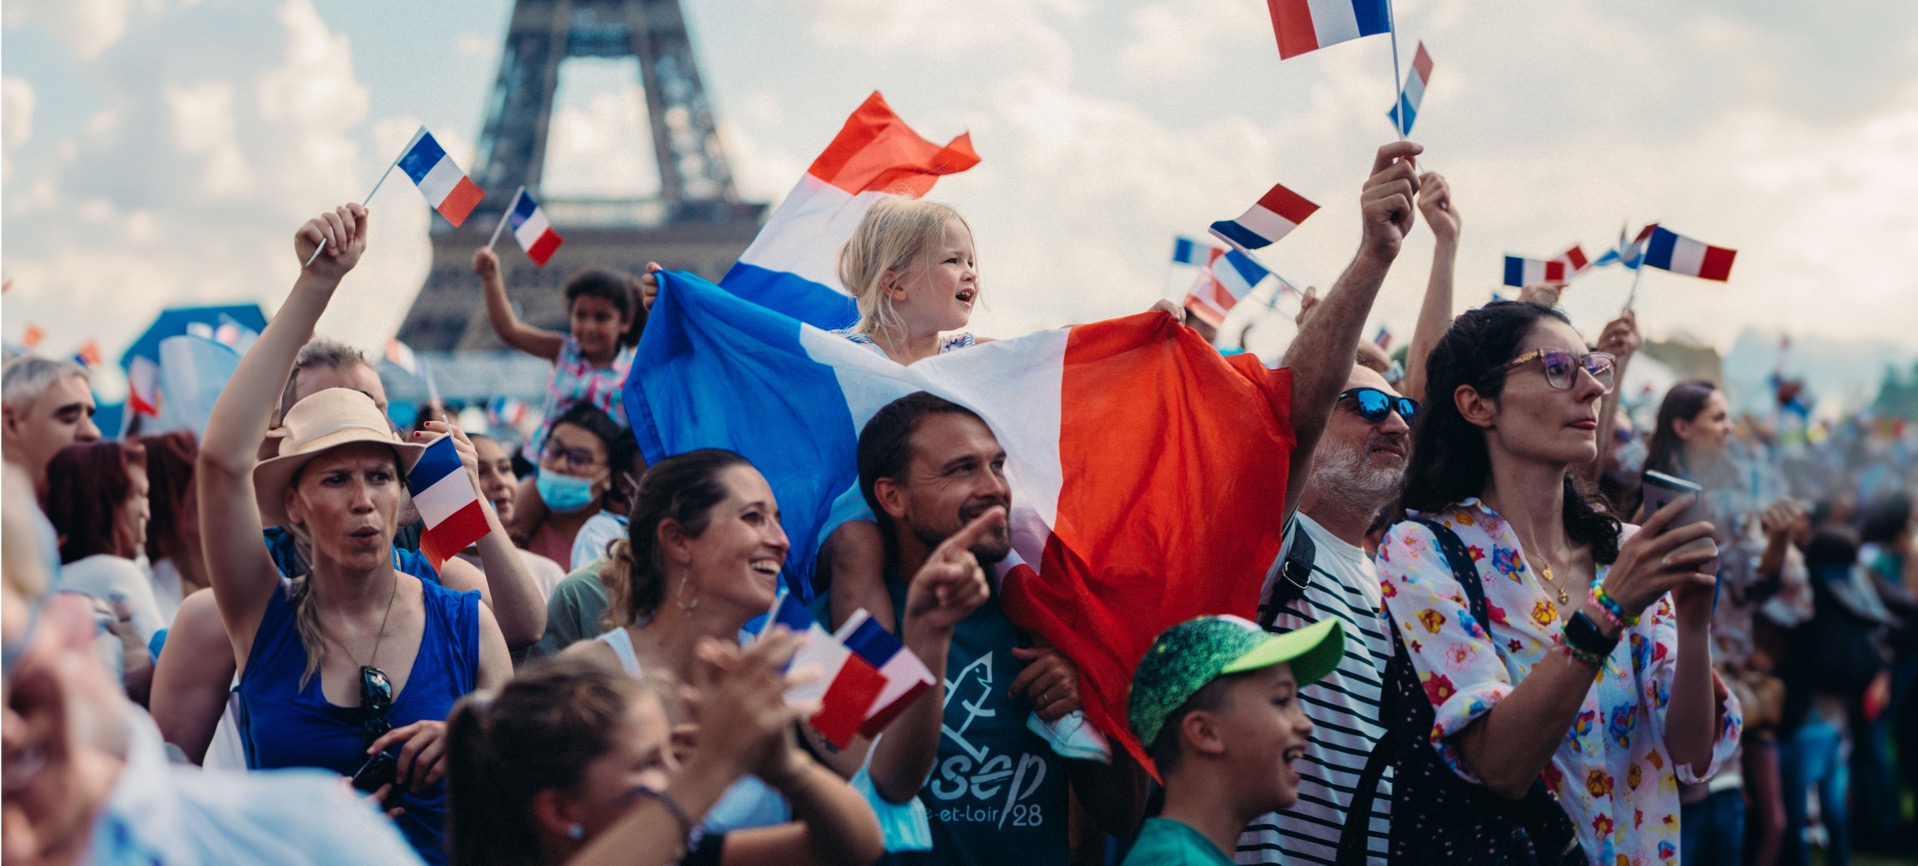 Crowd of cheering fans, girl on her father's shoulders with many waving France flags, the Eiffel Tower in the background